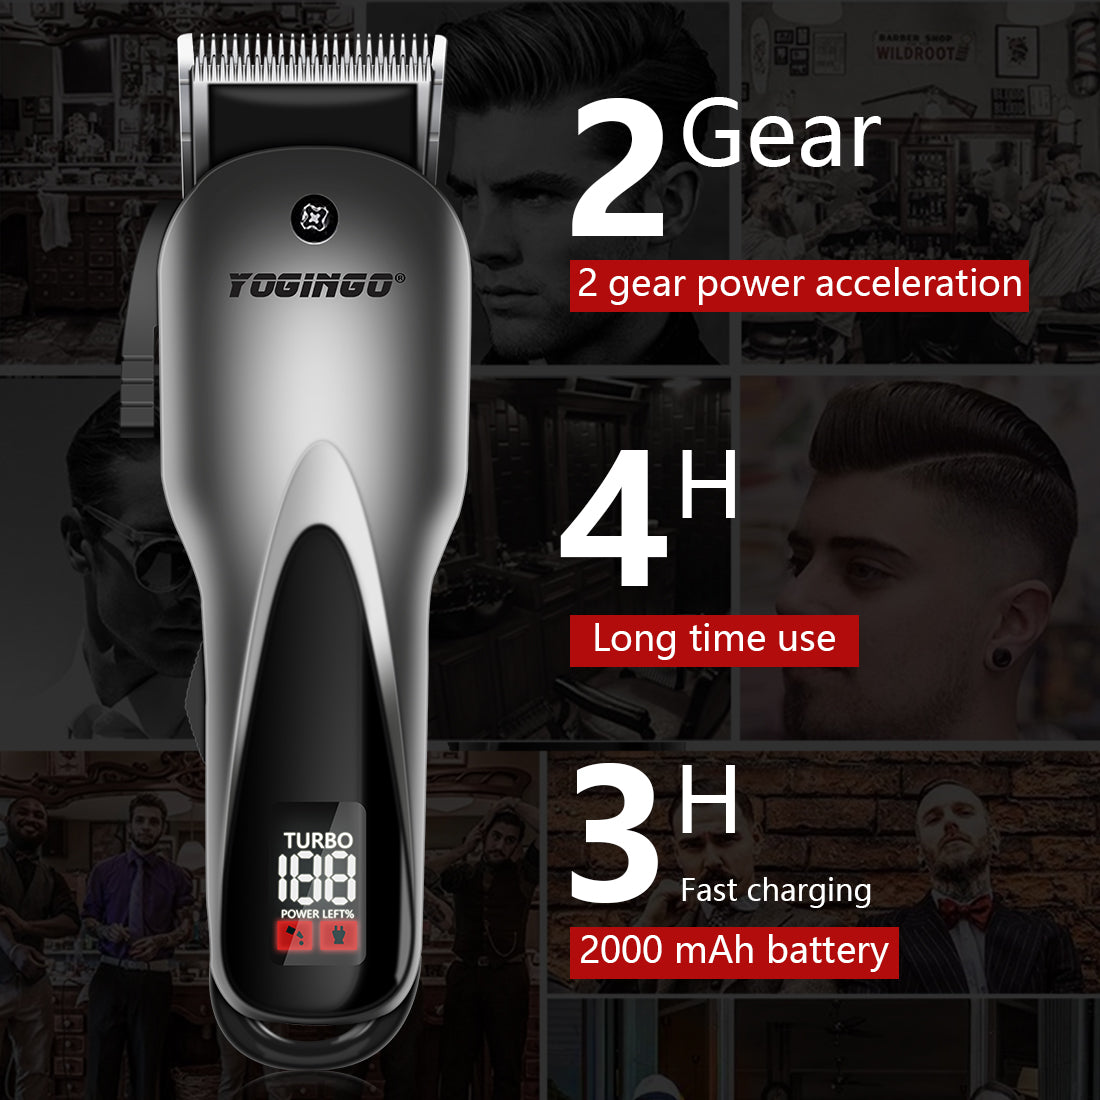 good hair clippers for home use